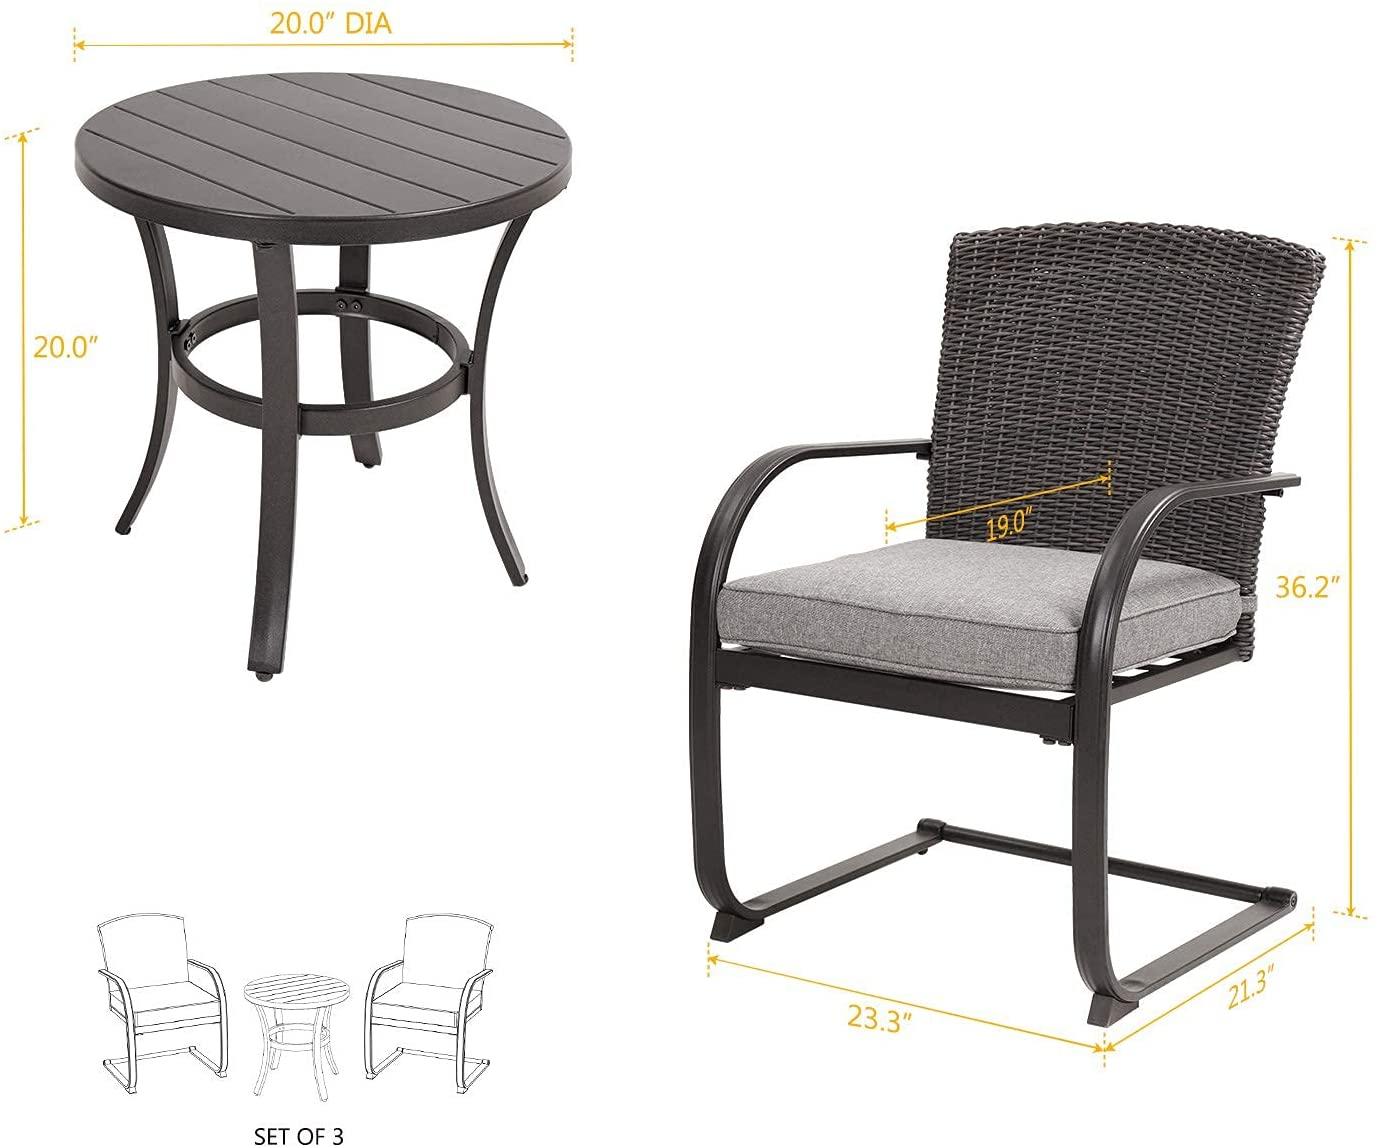 Mydepot SR 3 Piece Outdoor Patio Furniture Set Bistro Set 2 Wicker Chairs with Cushion and Coffee Table